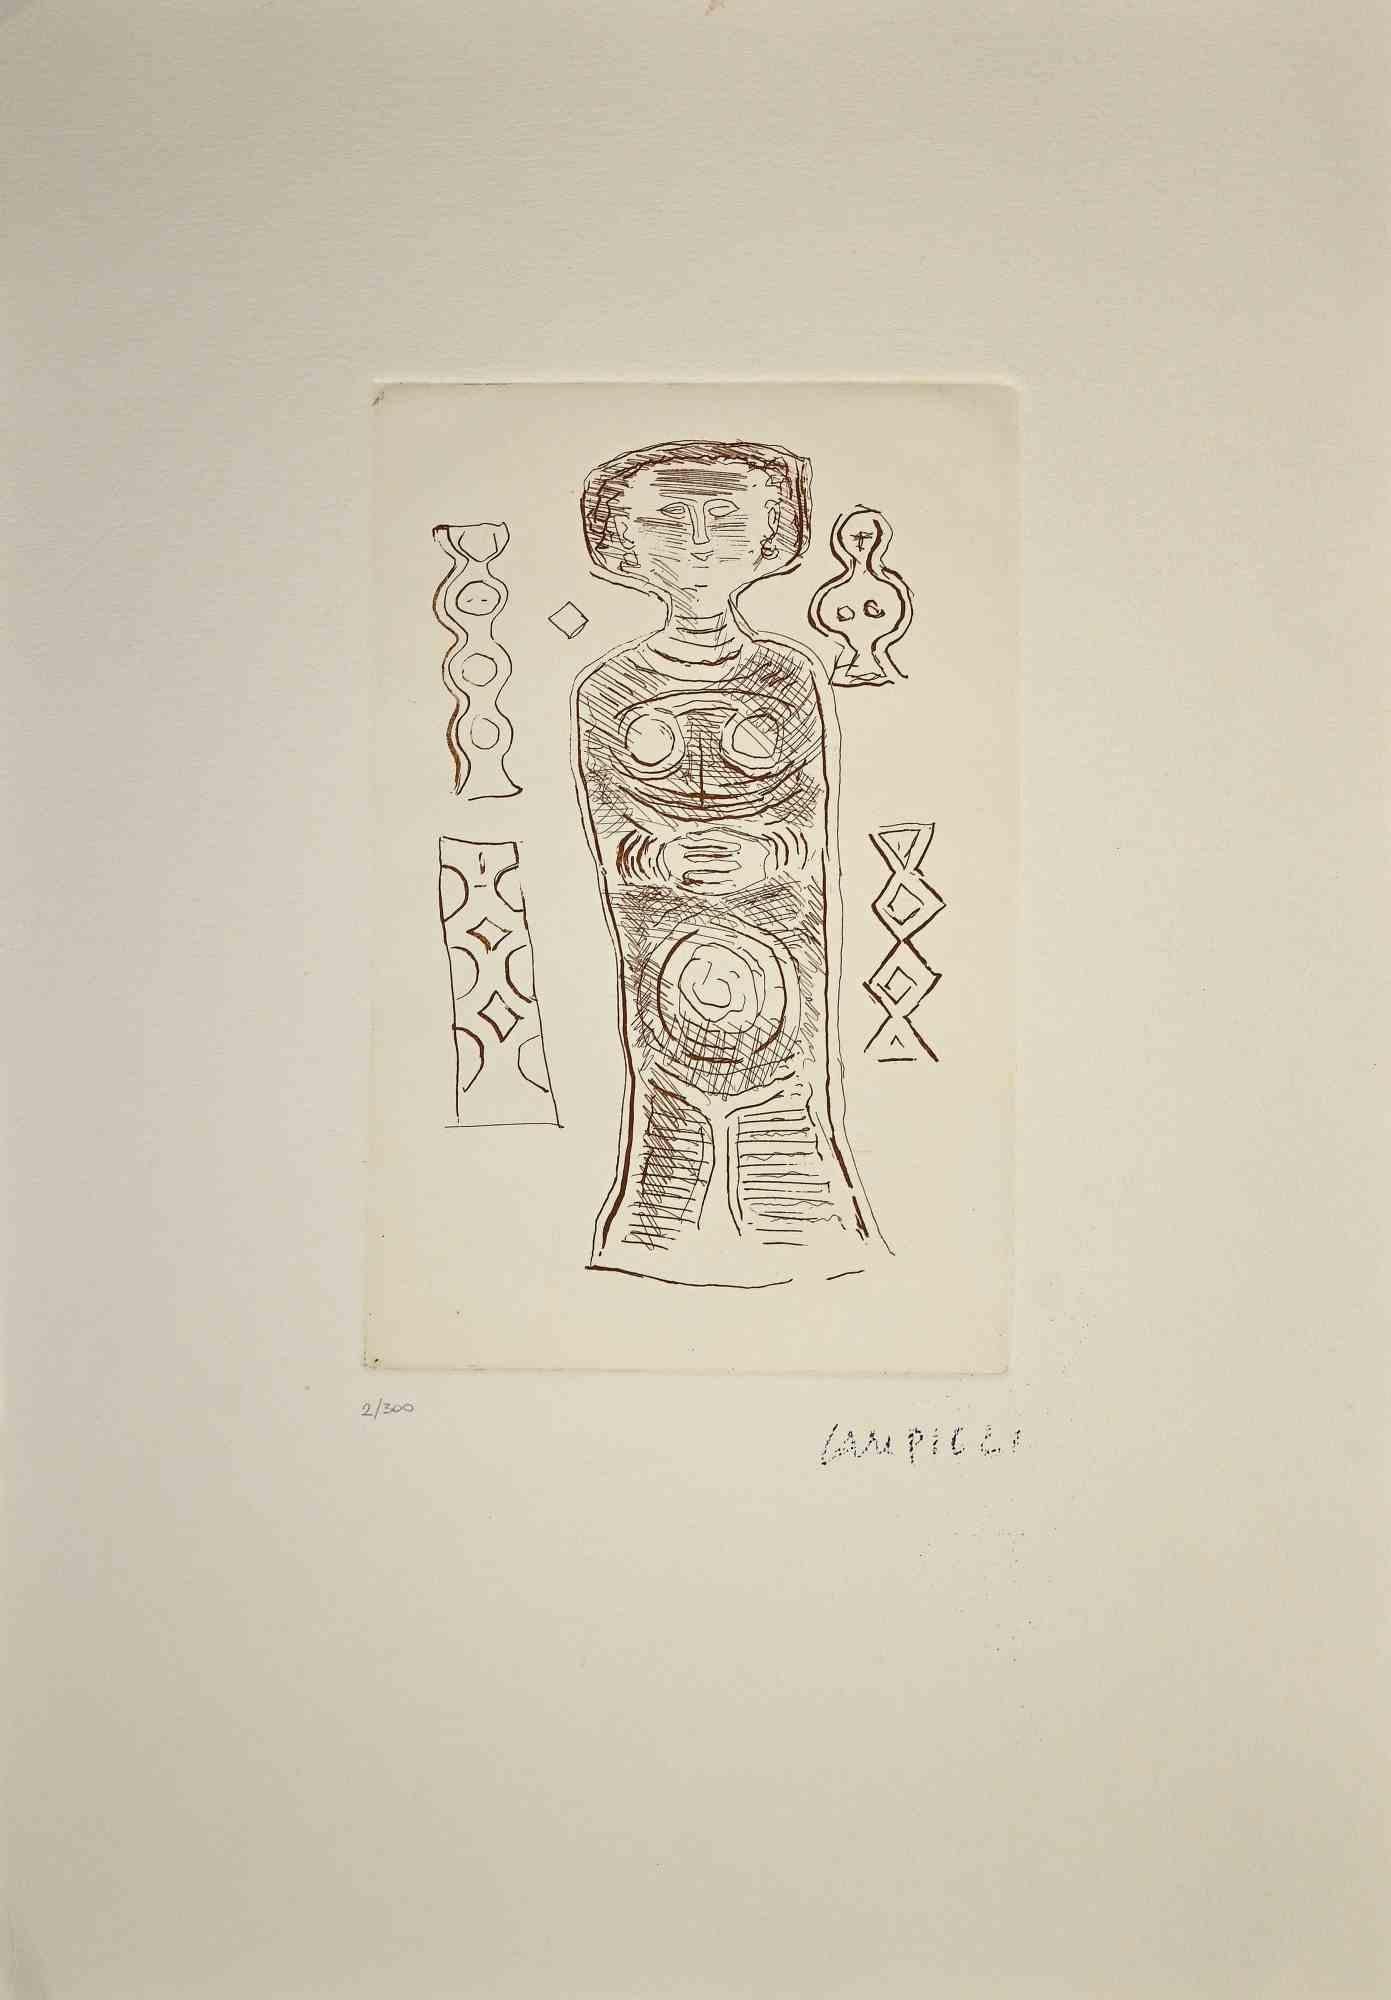 The idol  is a print realized by Massimo Campigli in the 1970/1971.

Etching on paper.

This artwork it is part of a series of works created in the last period of the artist and printed at the turn of the year of his death, which took place in 1971.